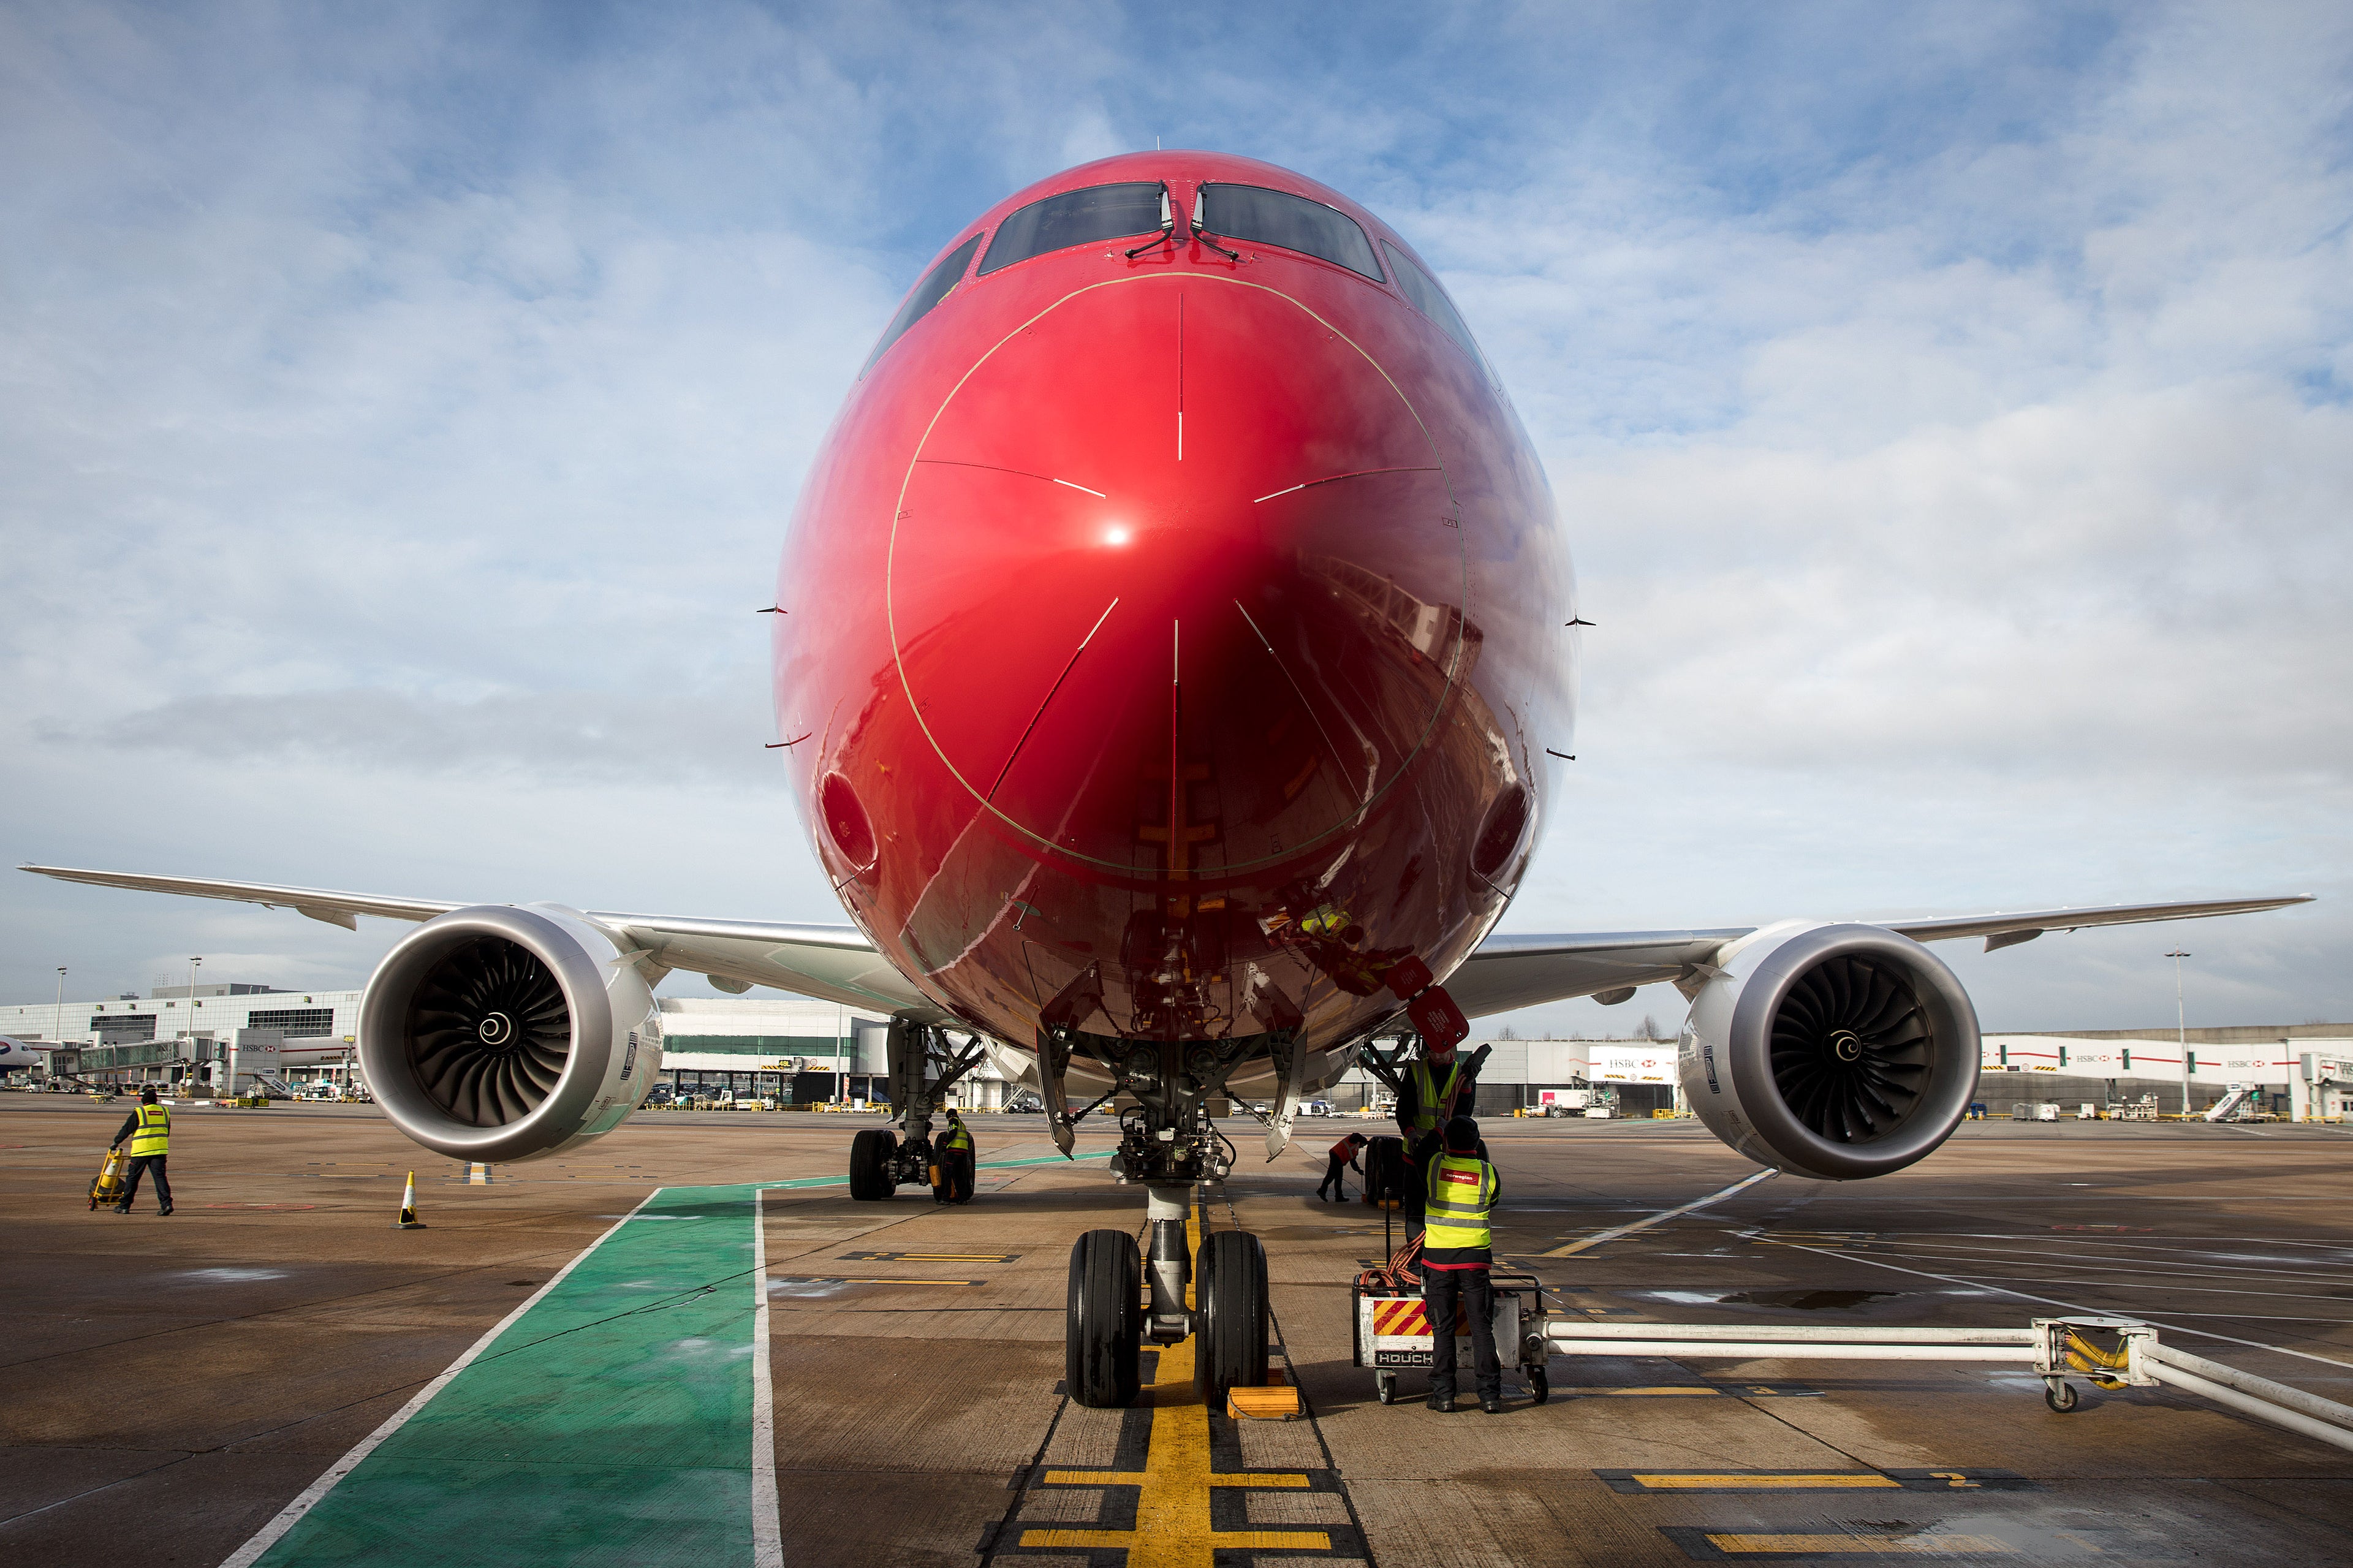 Norwegian Air Shuttle ASA Operations As Airline Attracted 29.3 Million Passengers Last Year